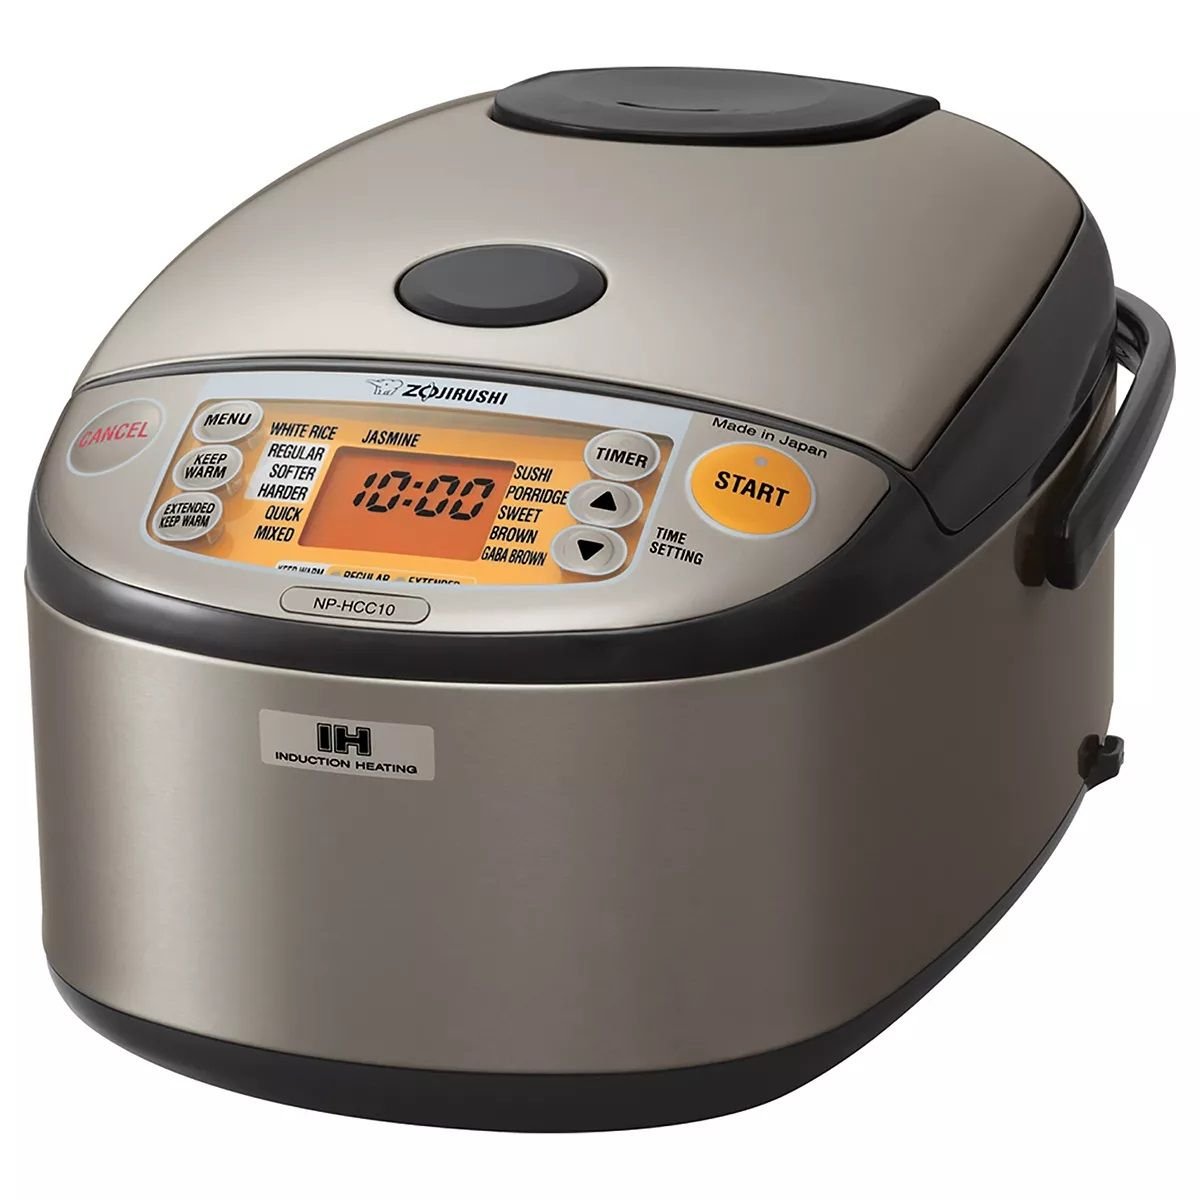 Get Zojirushi Brown Indoor Electric Grill Delivered